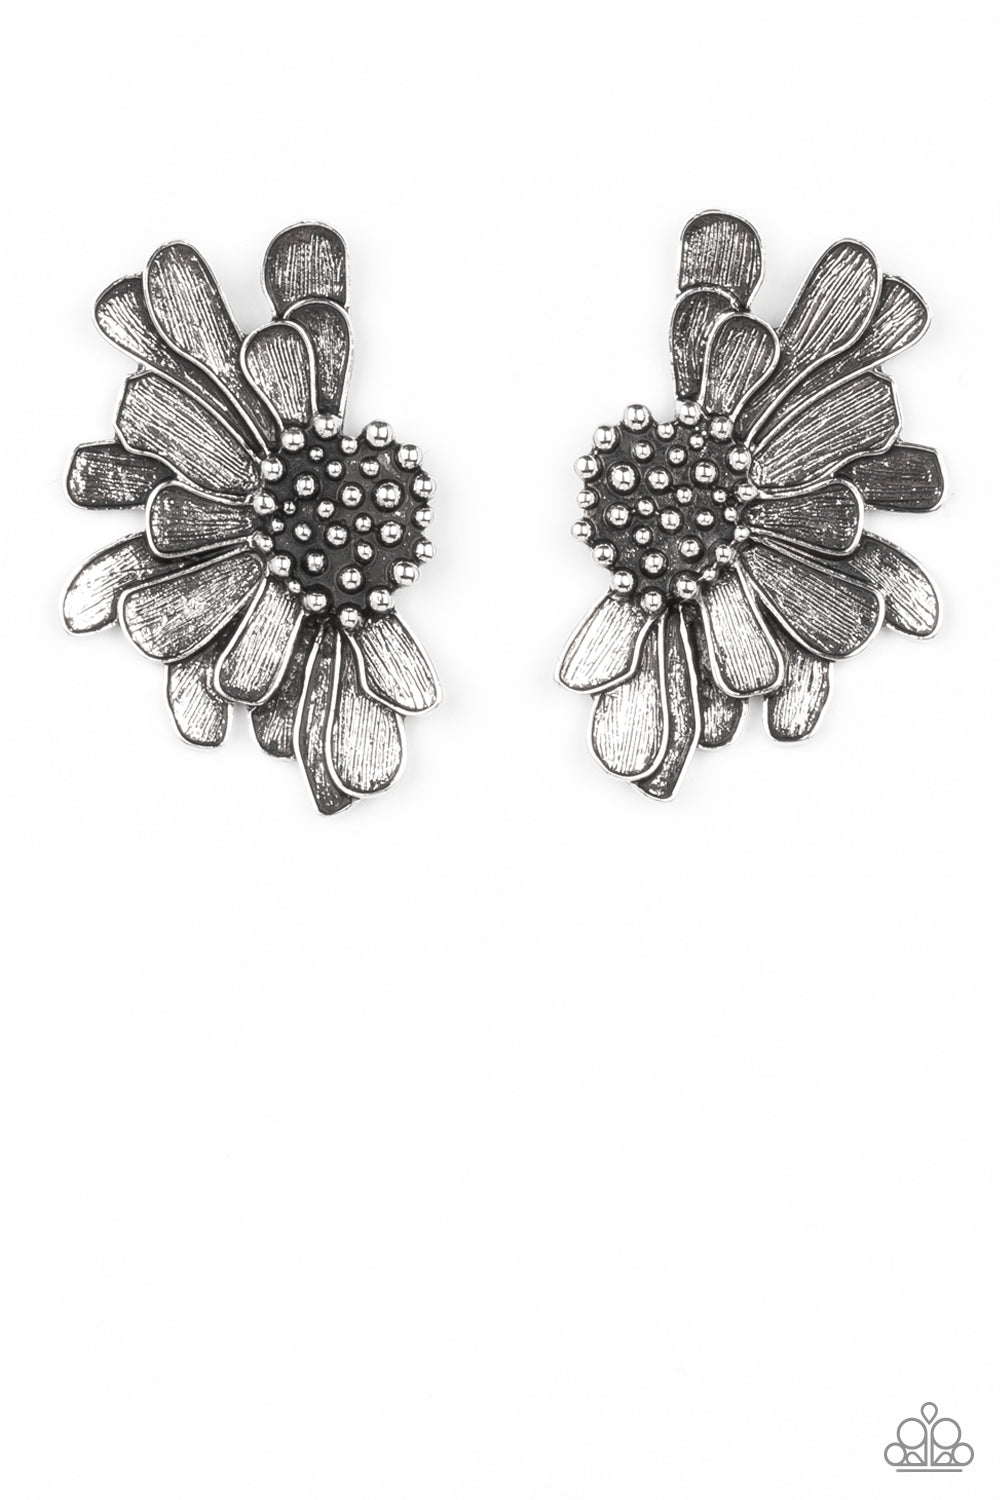 Paparazzi Farmstead Meadow - Silver April Life of the Party Earrings imperfect silver petals bloom from a studded center, layering into a rustic half blossom for a whimsical flair. Earring attaches to a standard post fitting.  Sold as one pair of post earrings.  Life of the Party exclusive item April 2022.  